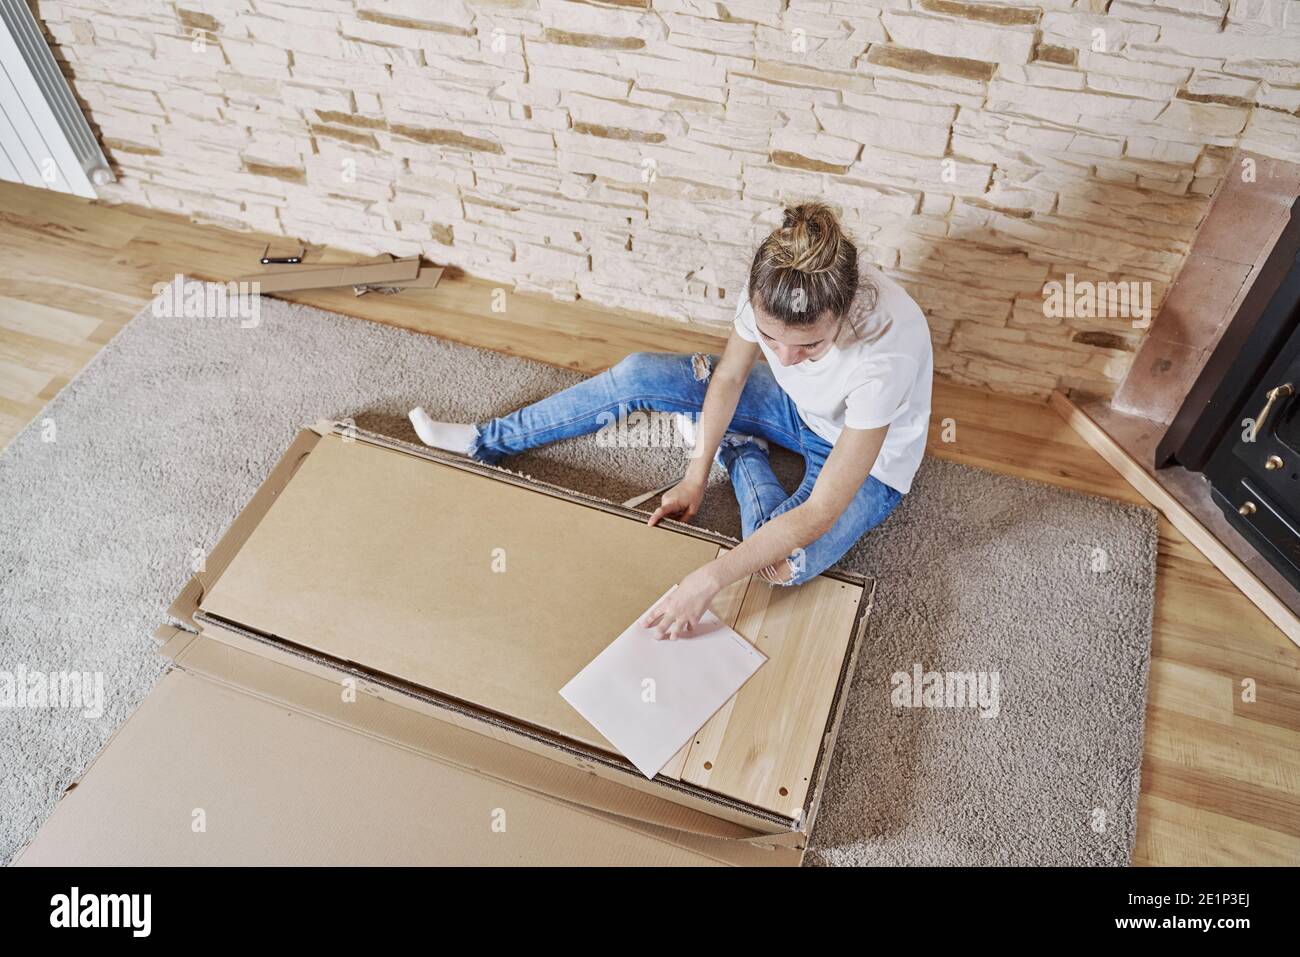 Above view of girl opening a paperboard box with a knife. The box is on the floor and the woman sitting. Horizontal photo Stock Photo